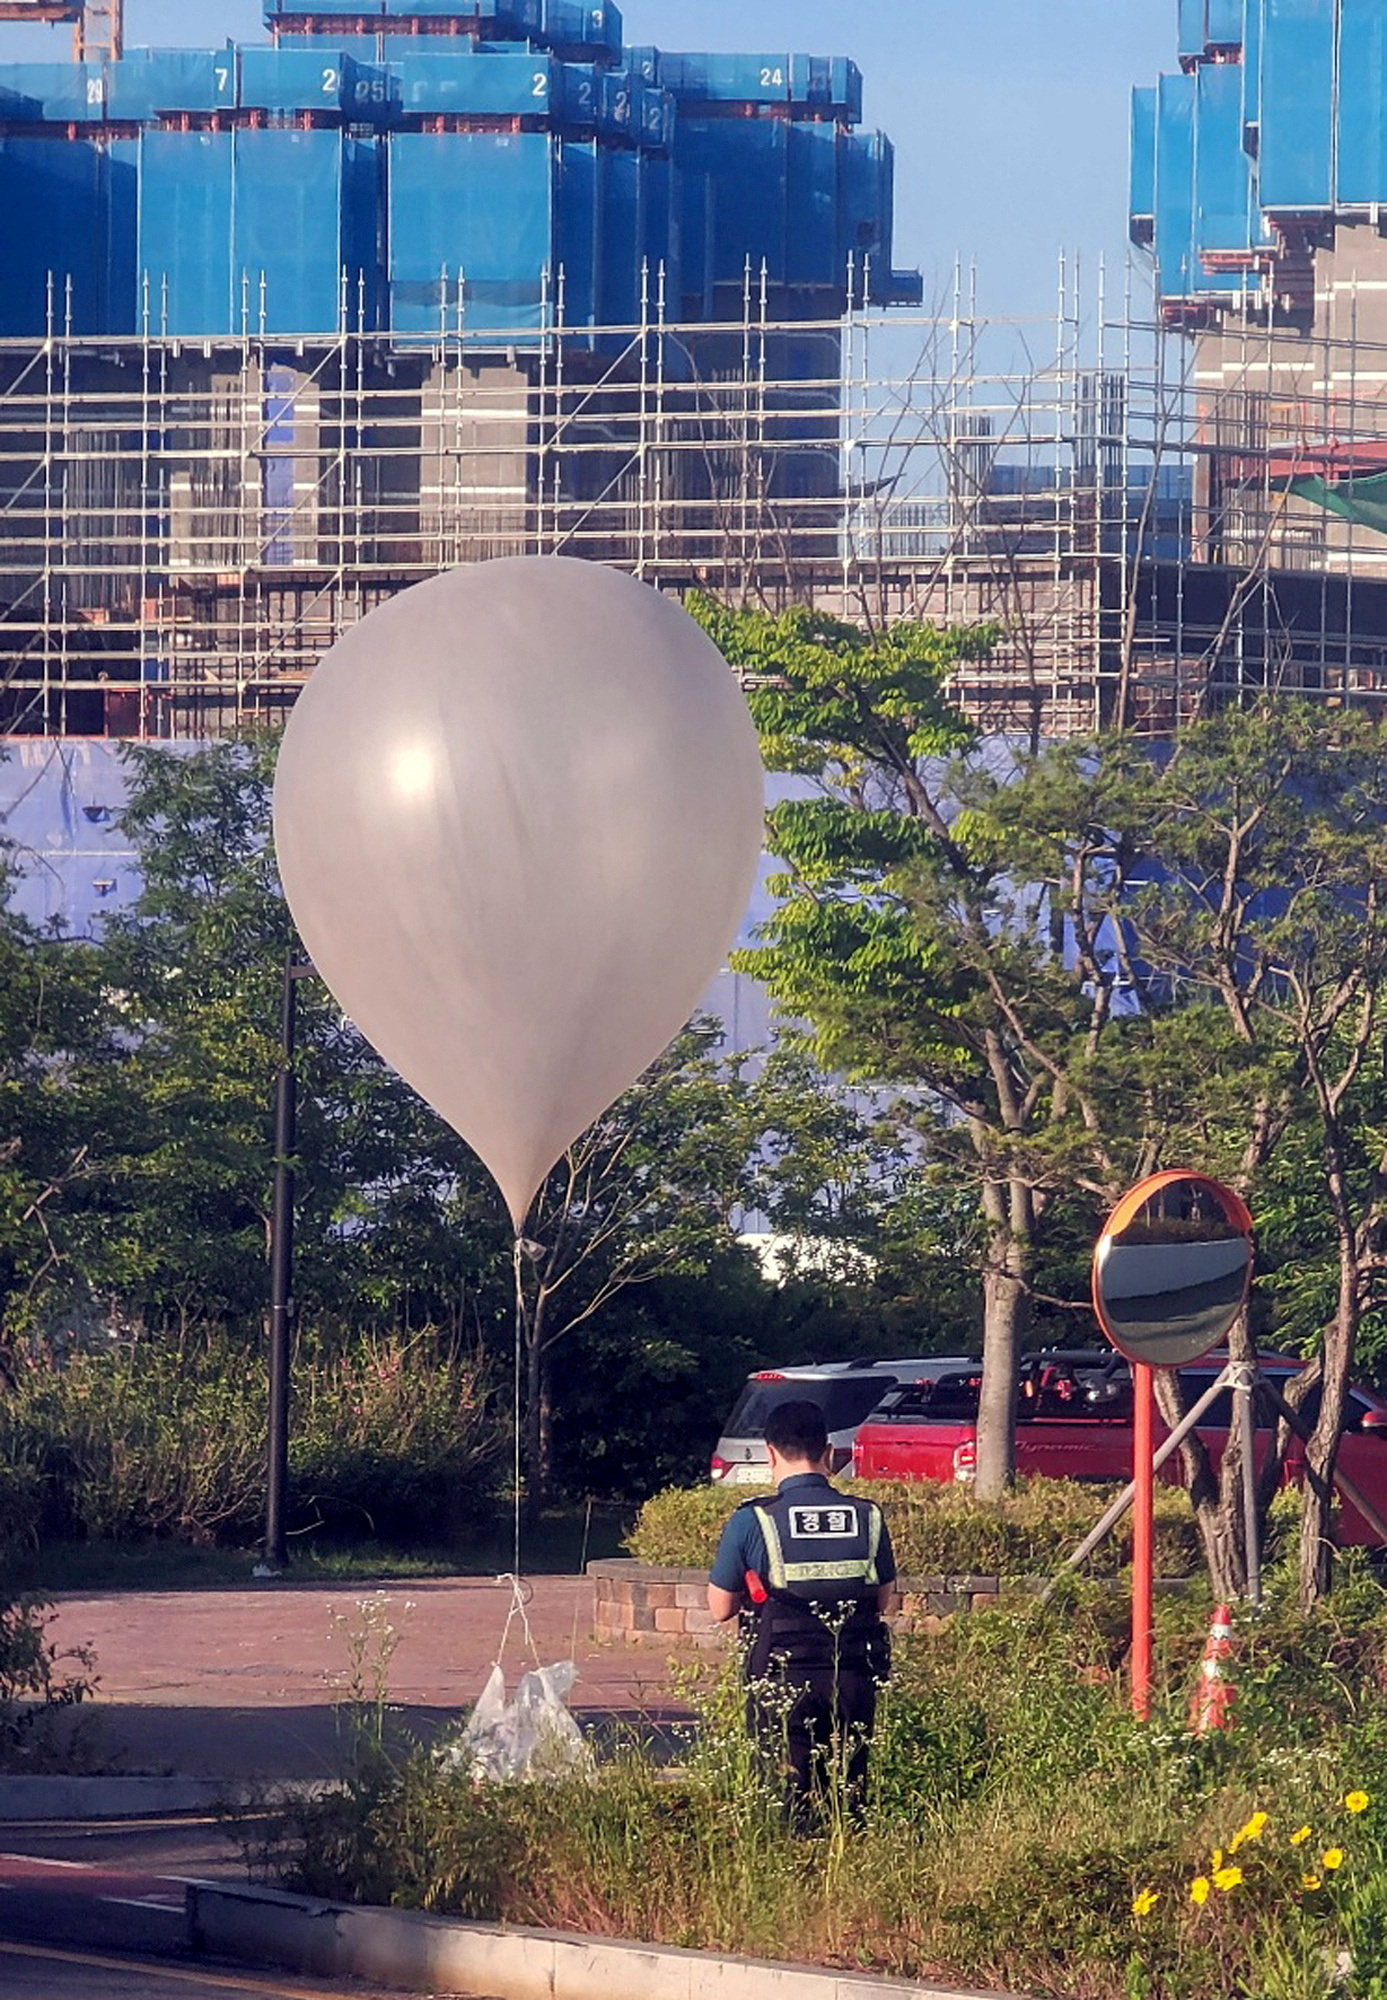 A balloon believed to have been sent by North Korea, carrying various objects including what appeared to be trash, is pictured in Incheon